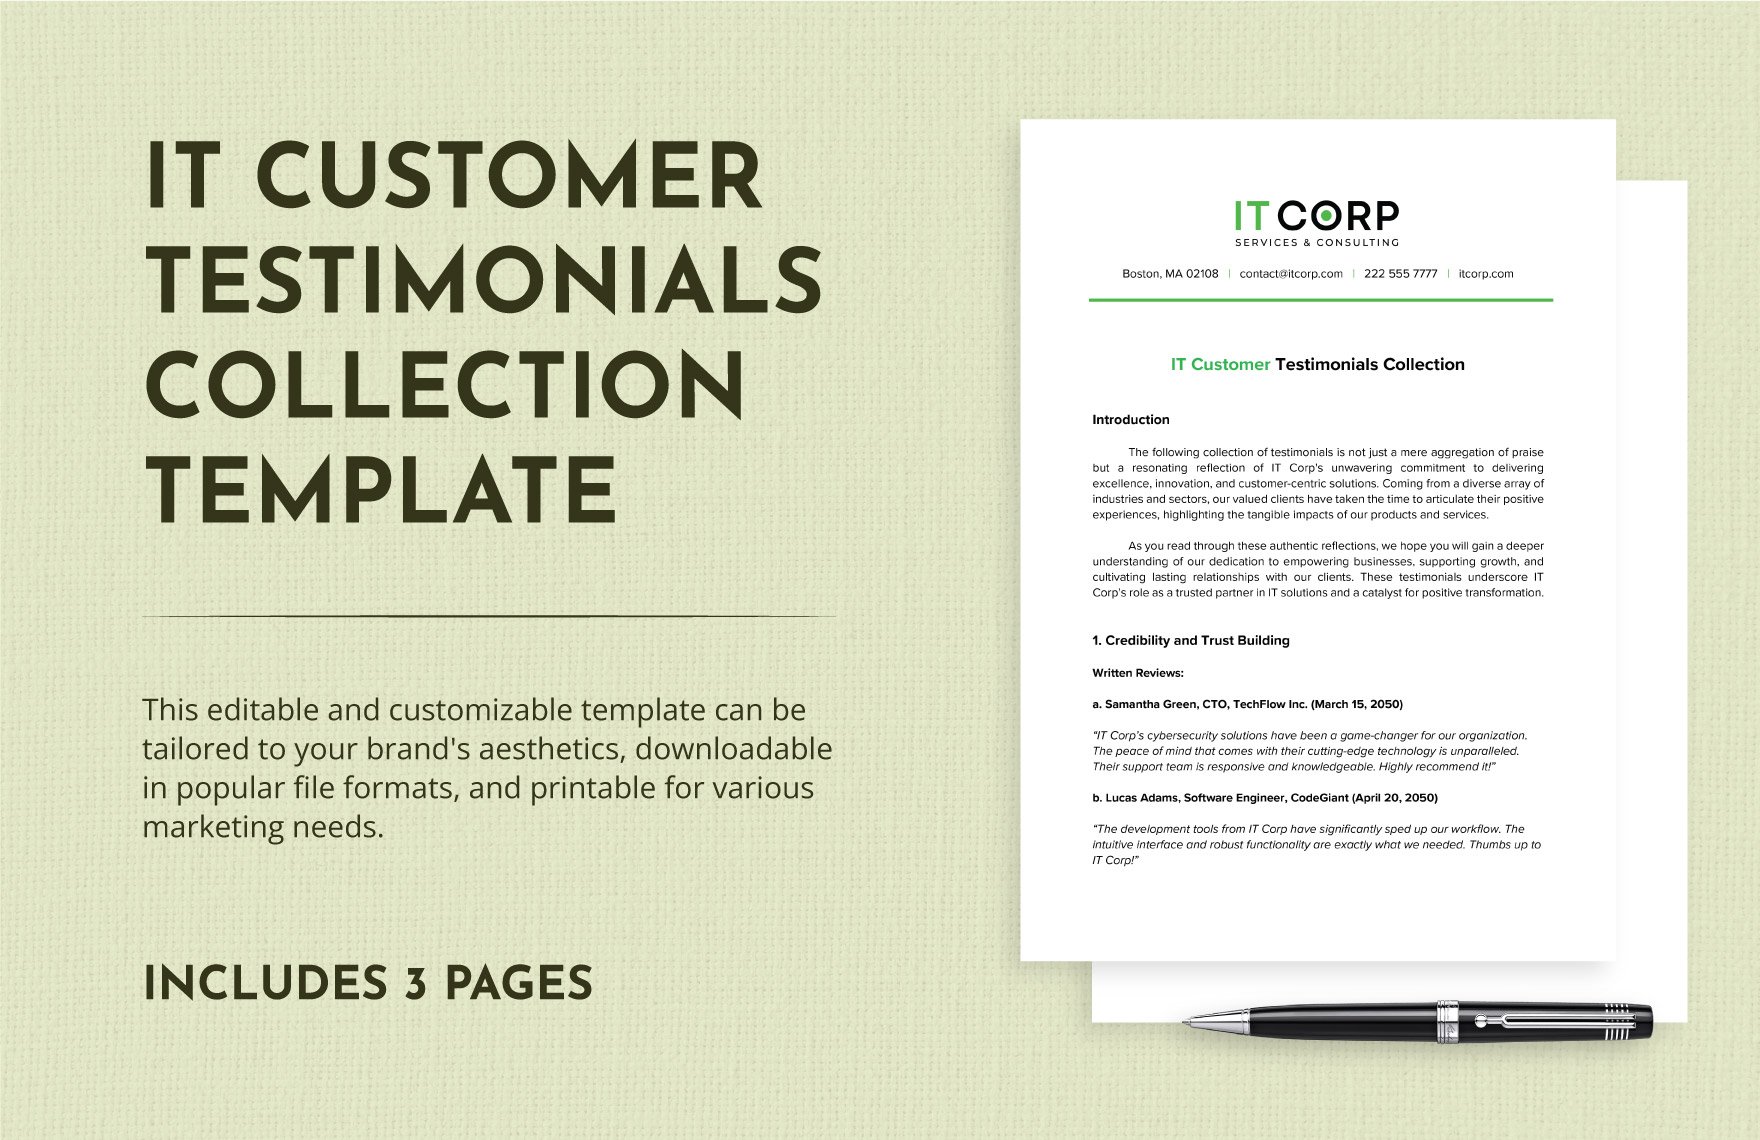 IT Customer Testimonials Collection Template in Word, Google Docs, PDF